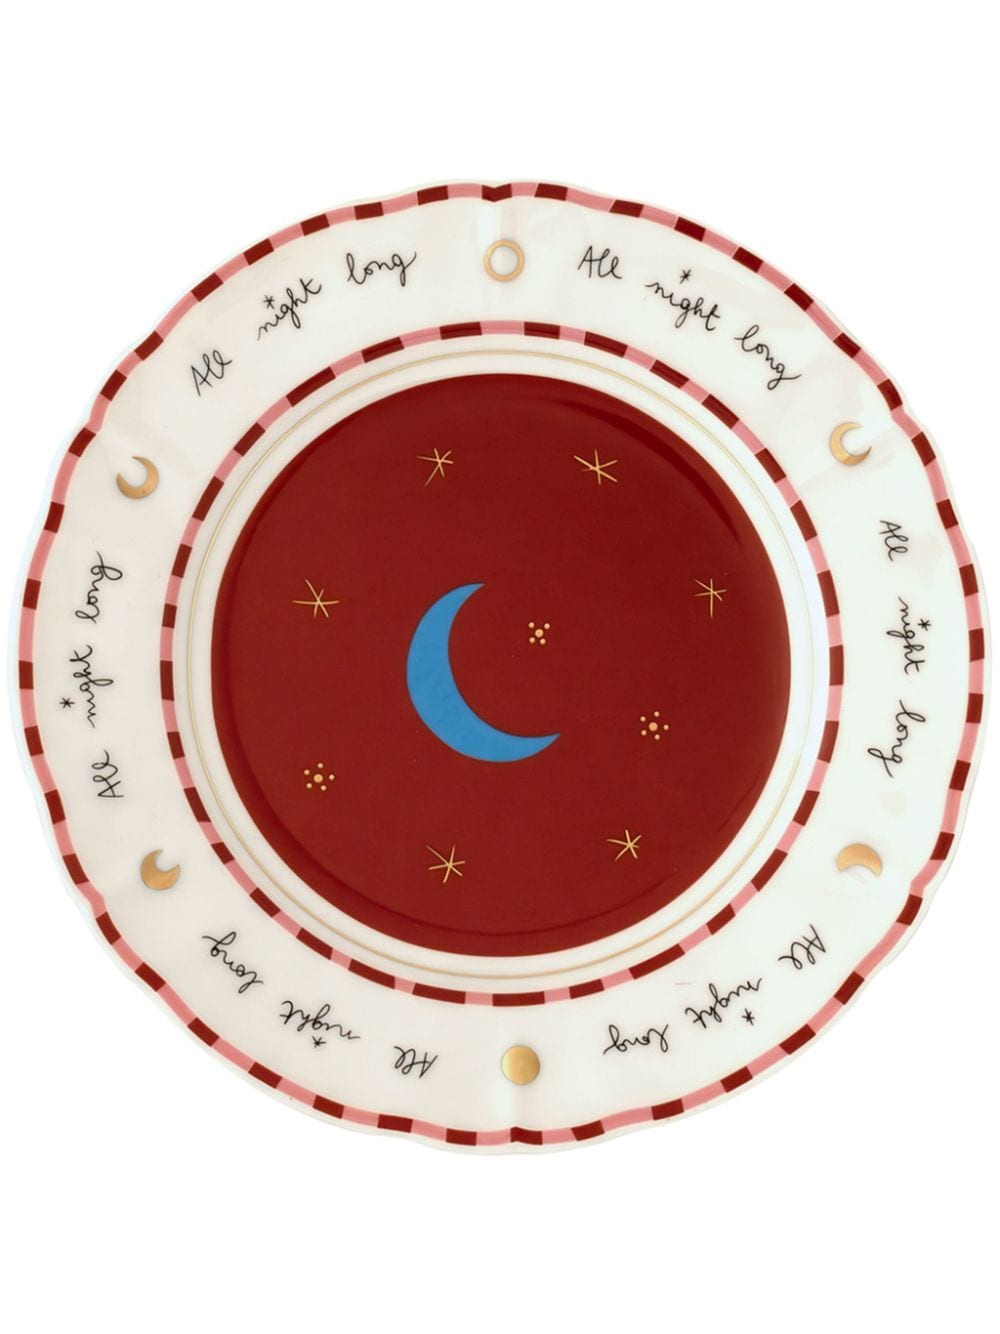 Bitossi Home Moon 陶瓷果盘（20.5厘米） In Red